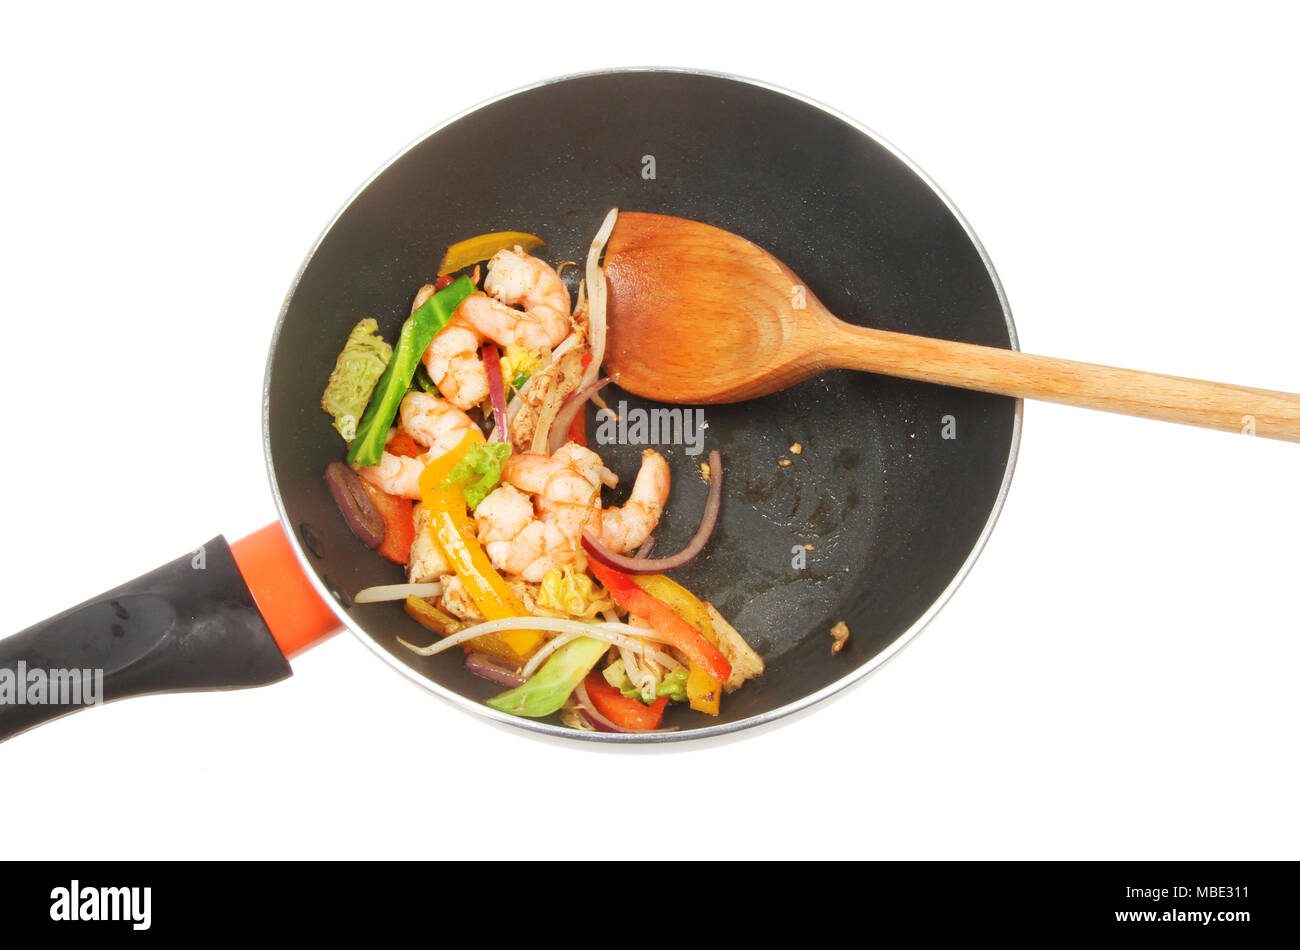 King prawns and stir fry vegetables with a wooden spoon in a wok isolated against white Stock Photo